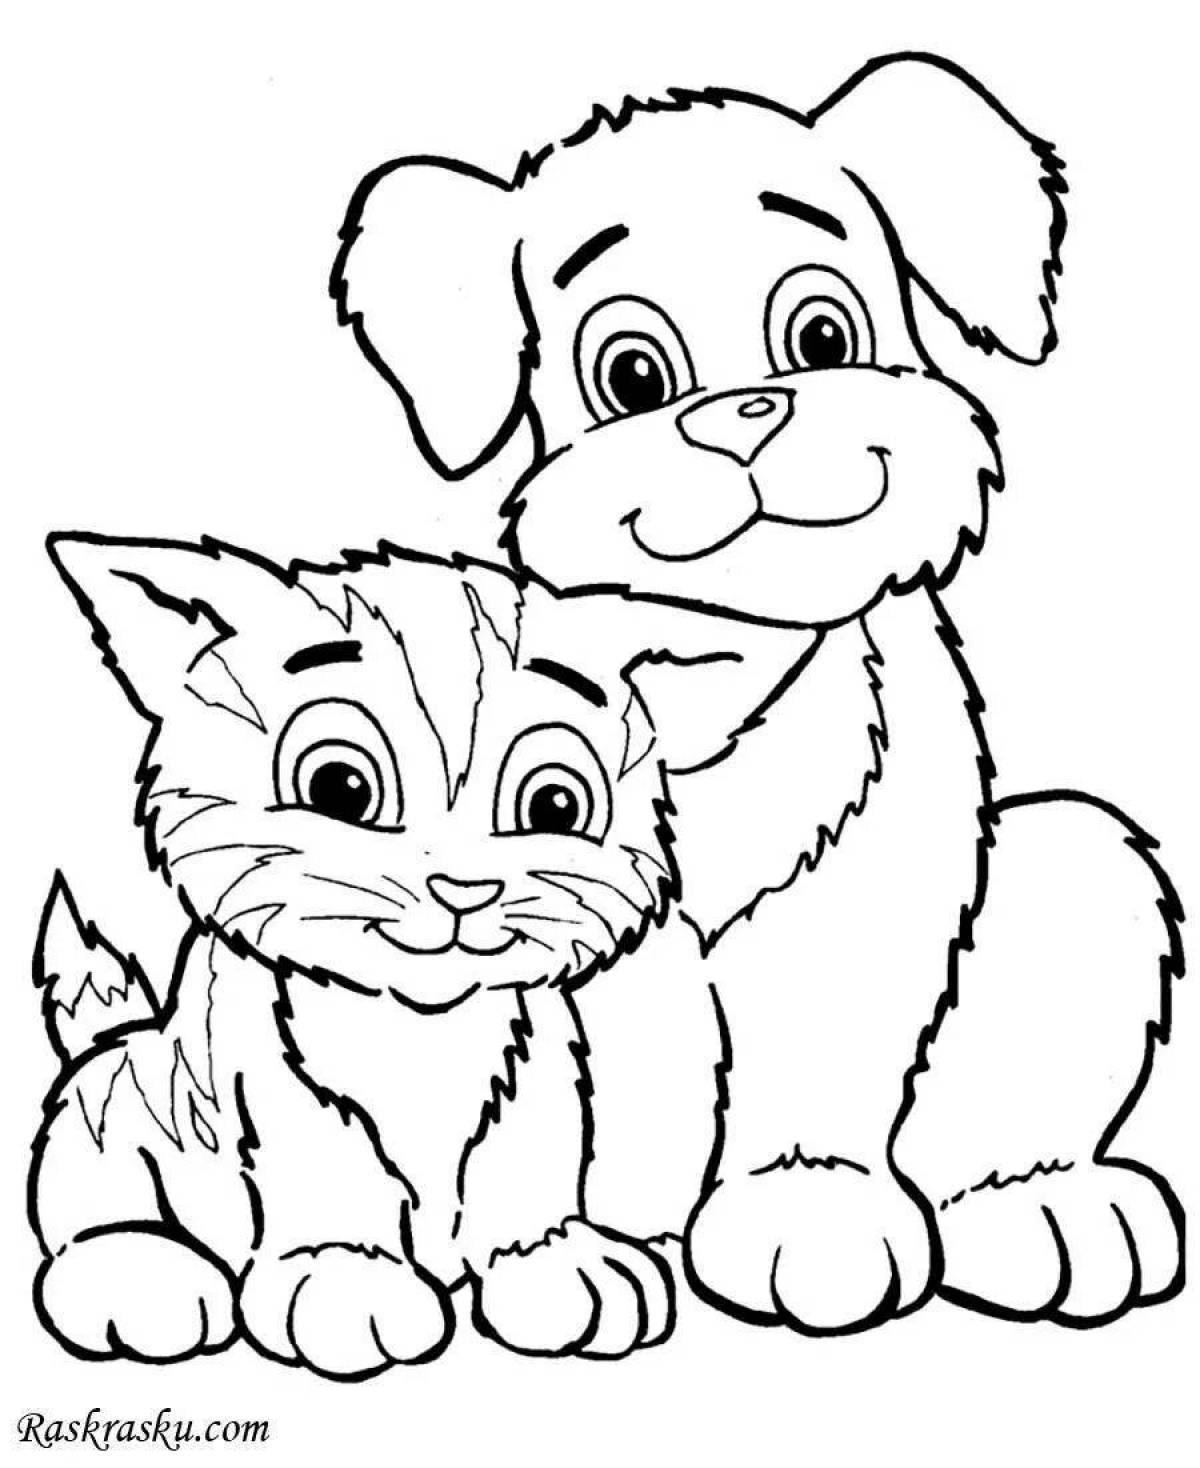 Great mysyk coloring book for kids